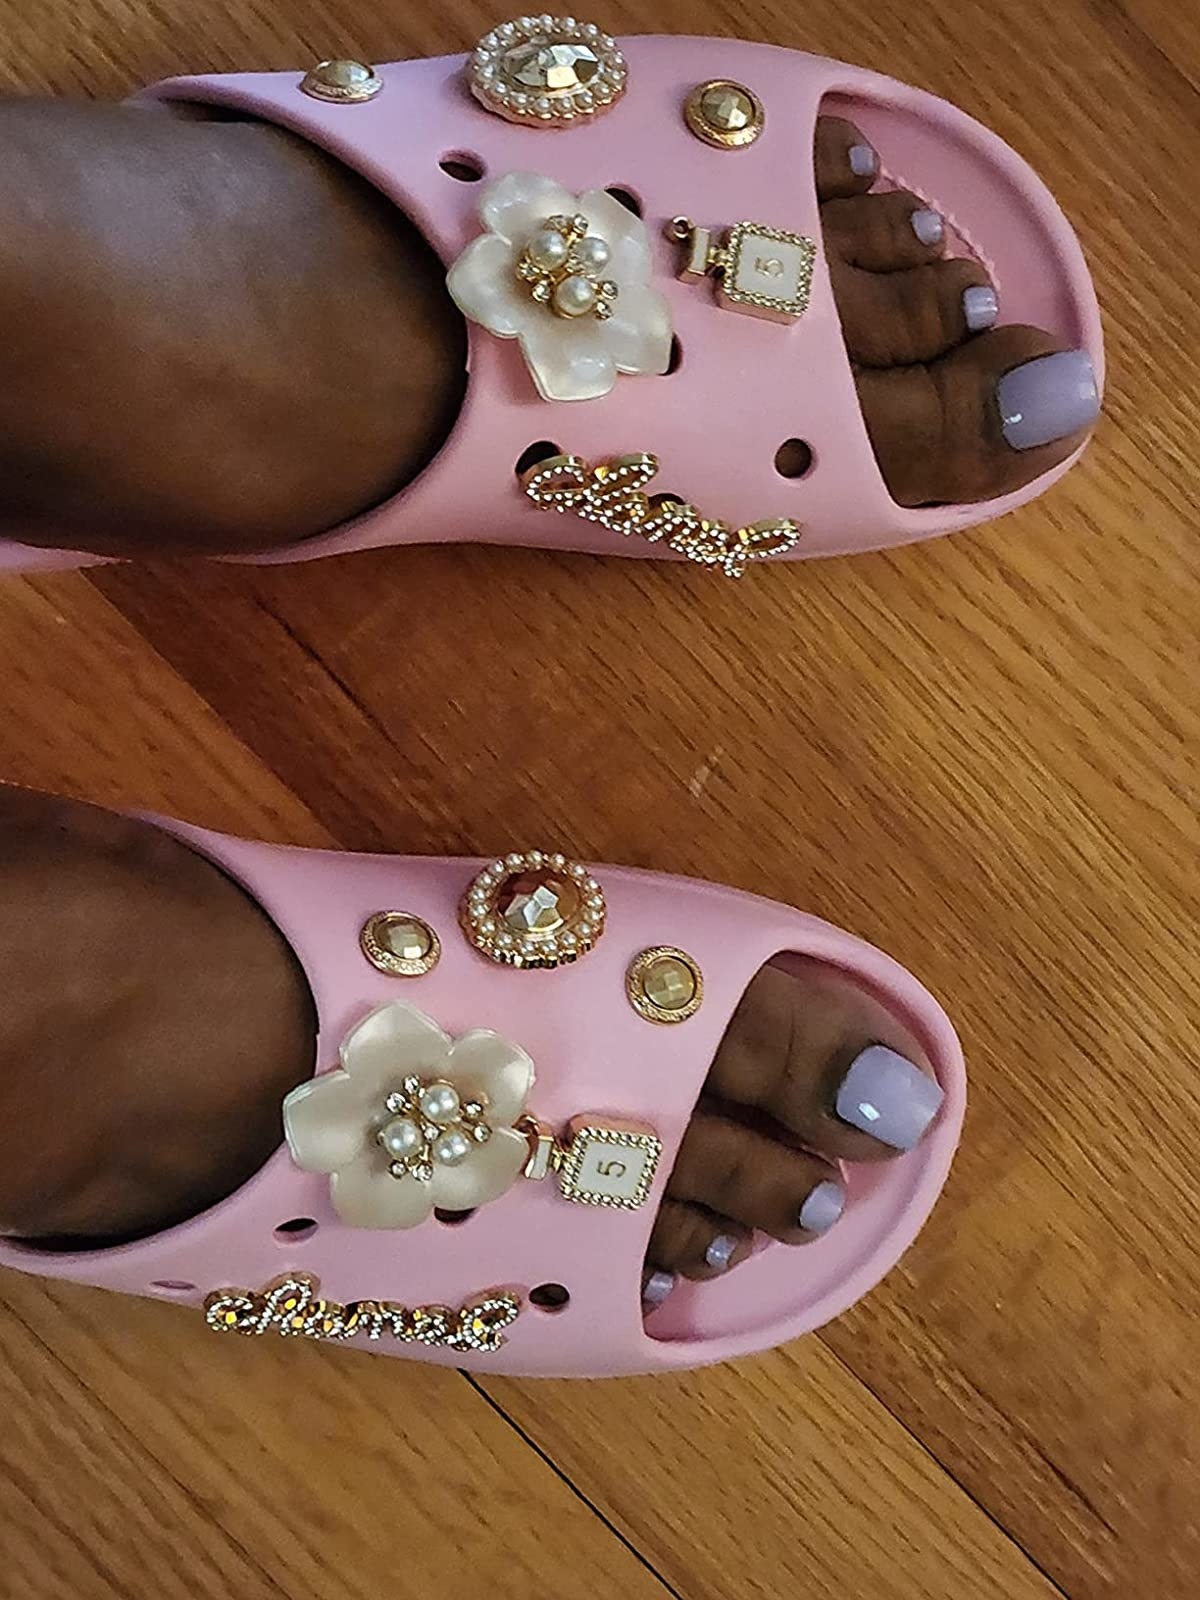 A reviewer wearing pink crocs with gold and white giblets